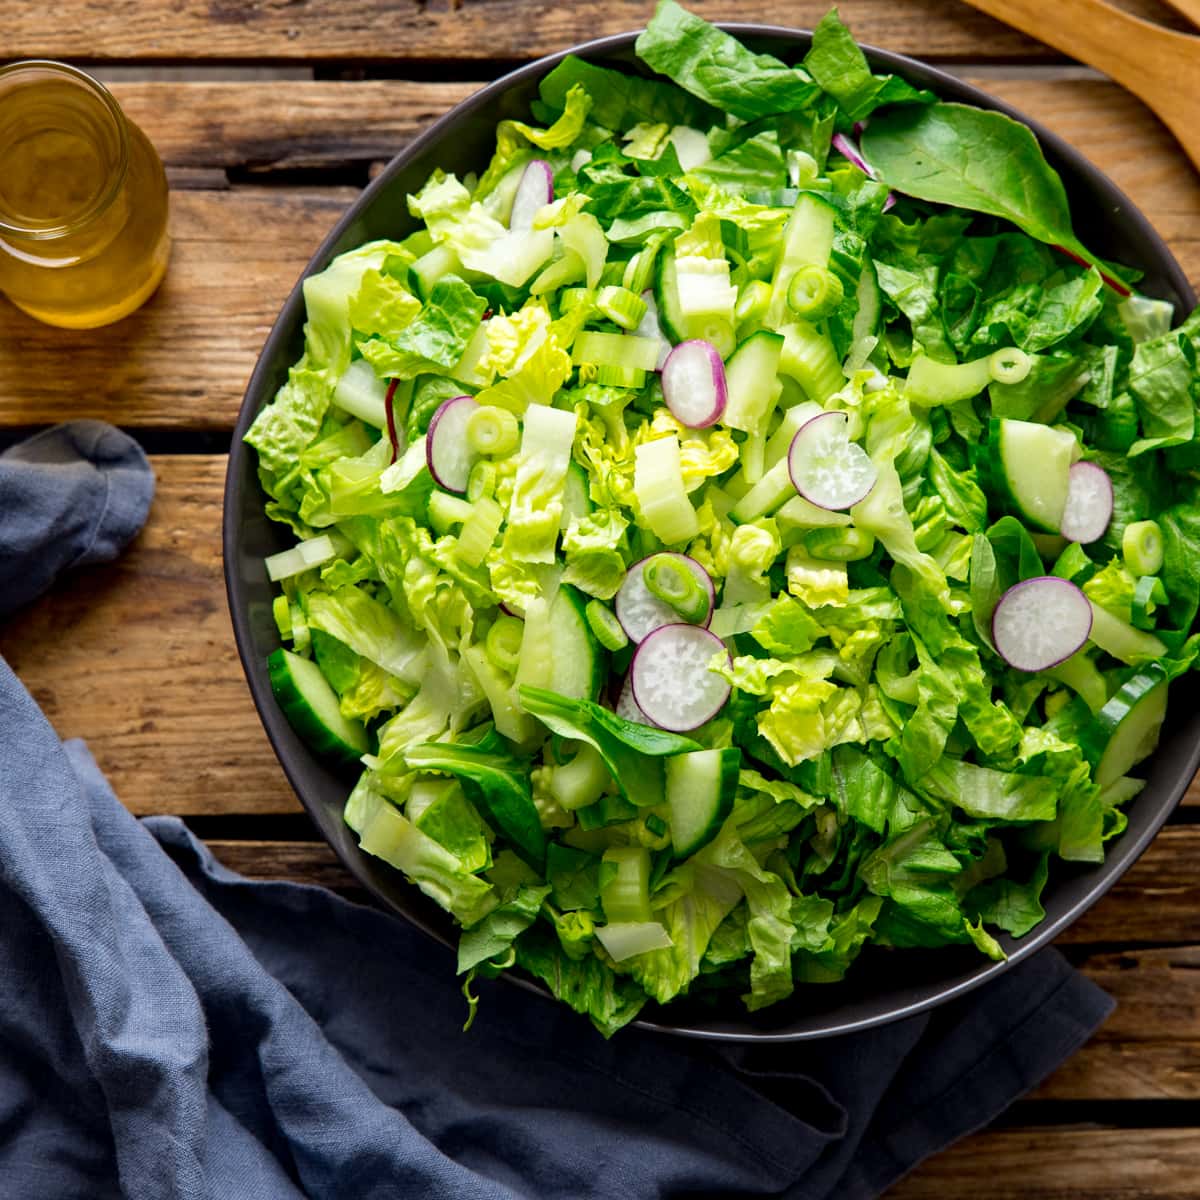 images of salads